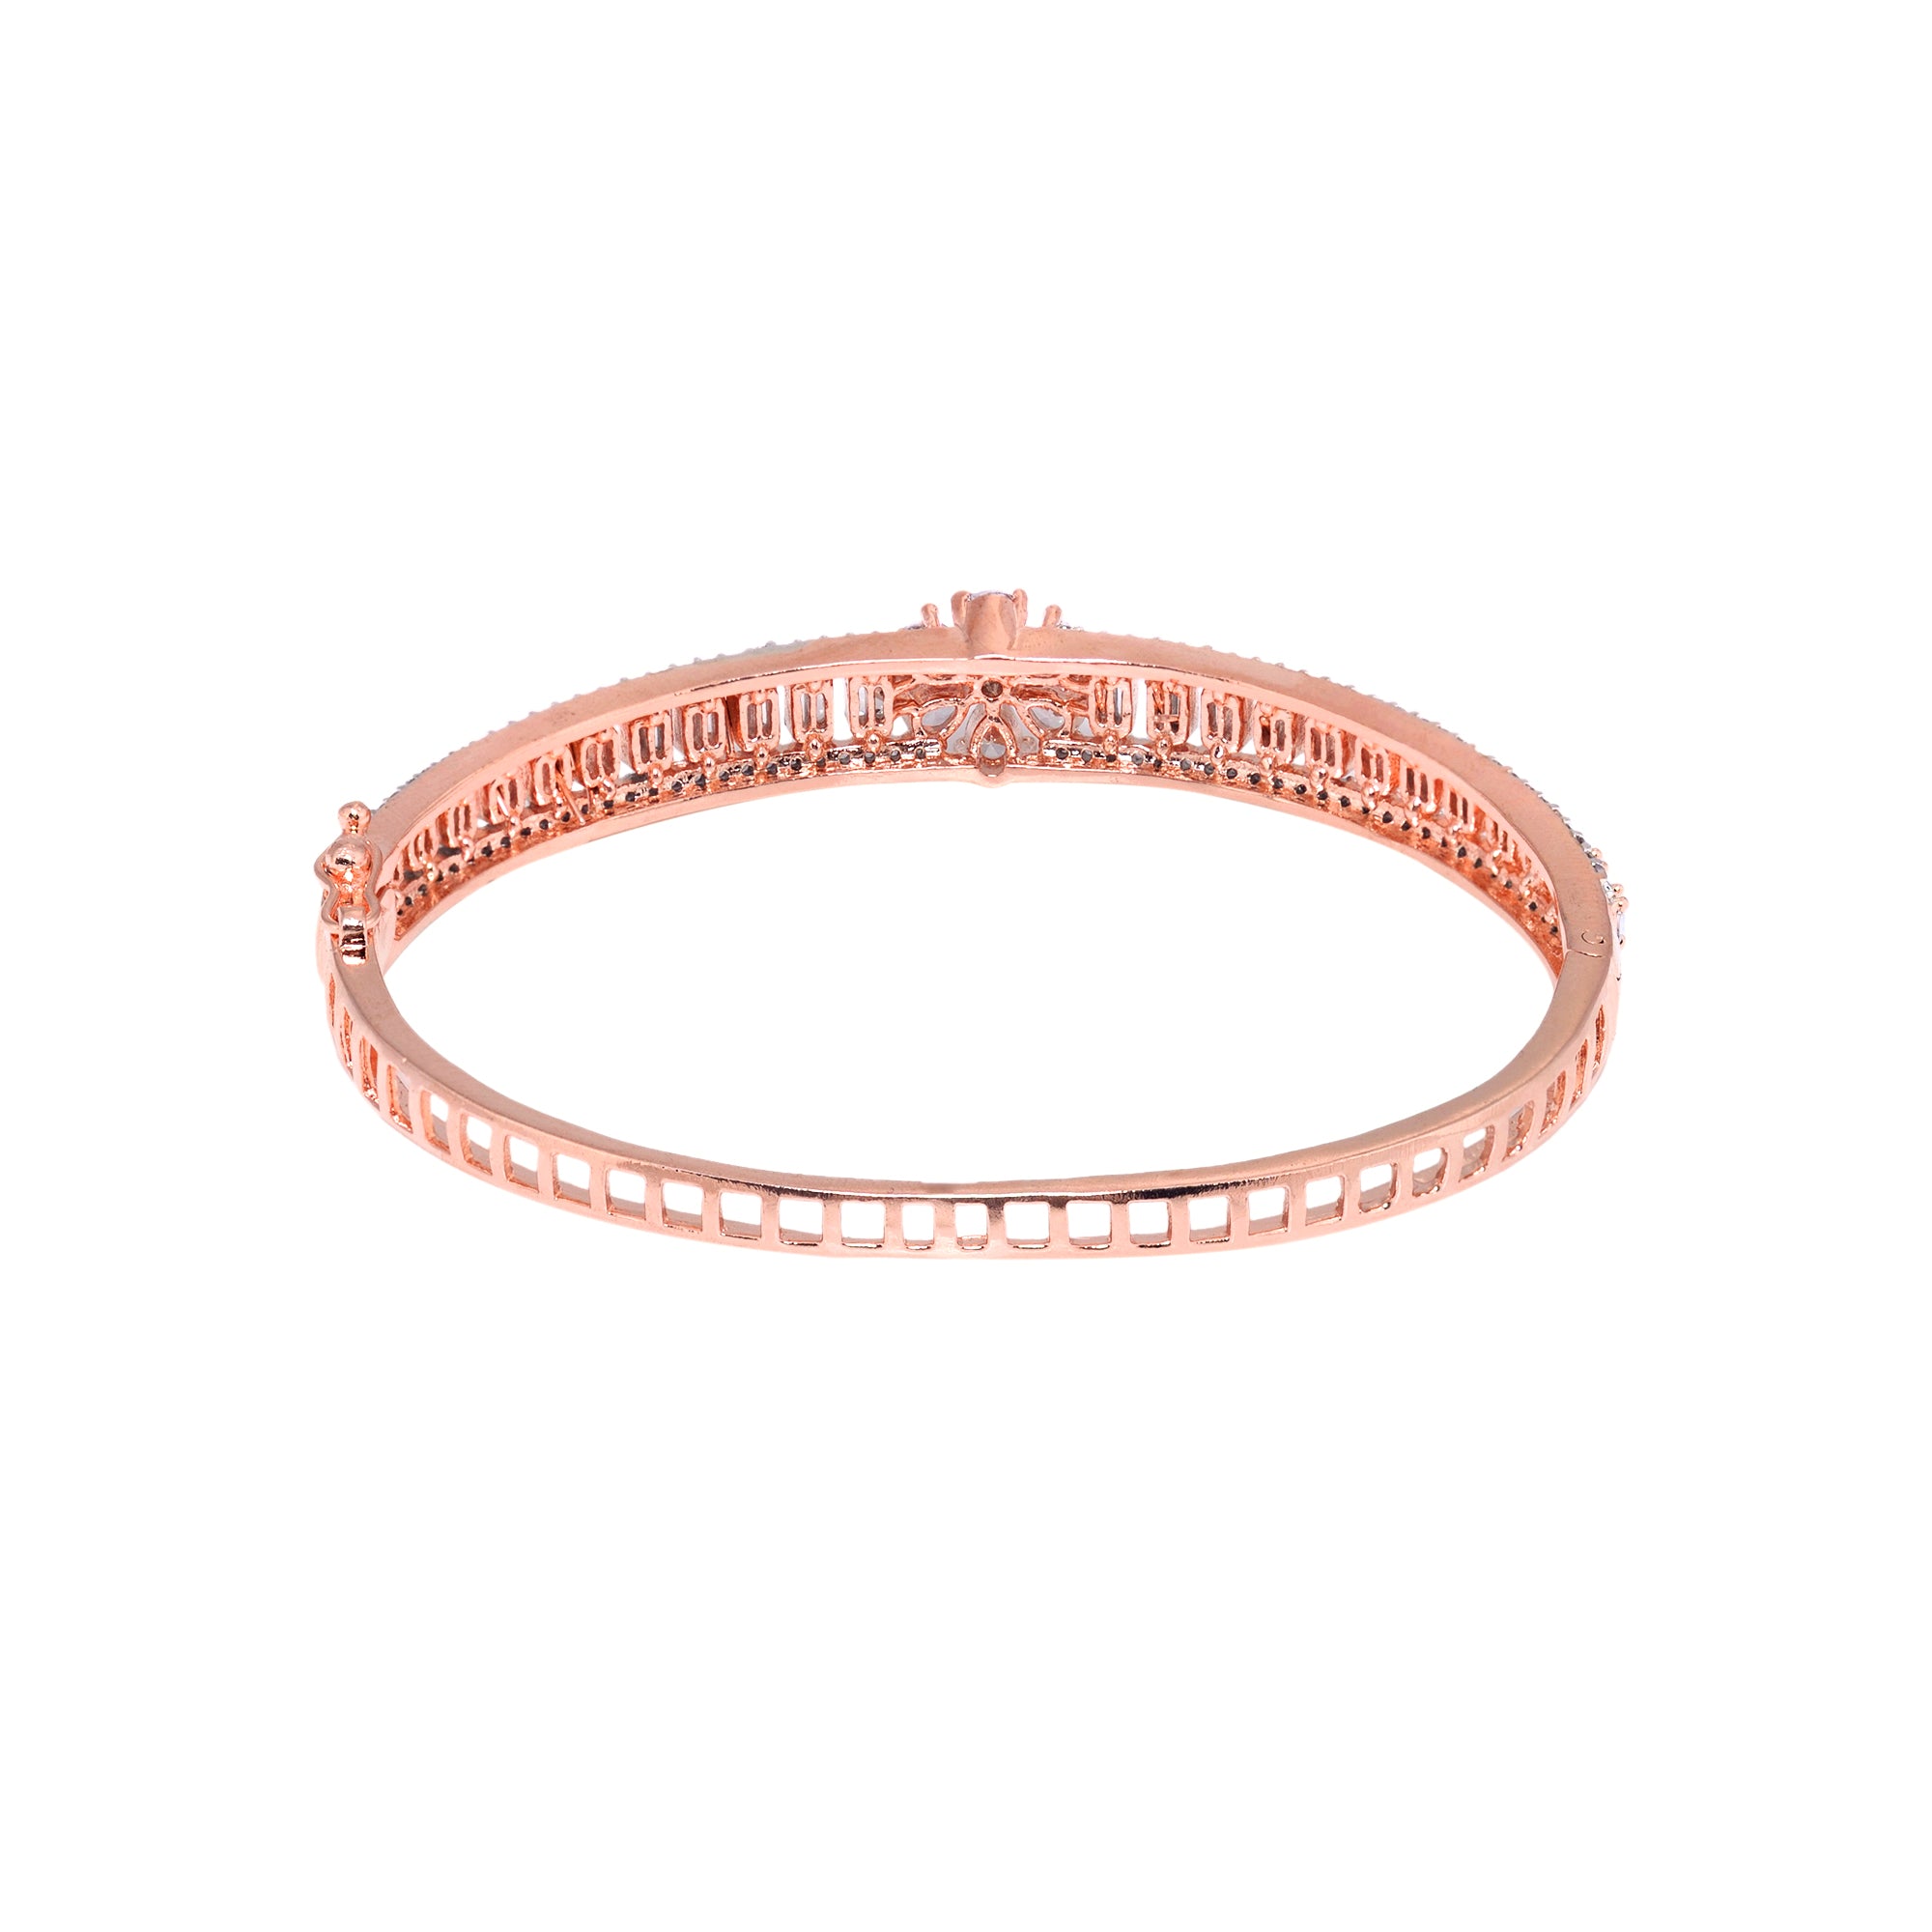 Floral Design Light Diamond Bracelet Rose Gold Plated For Women And Girls - Saraf Rs Jewellery